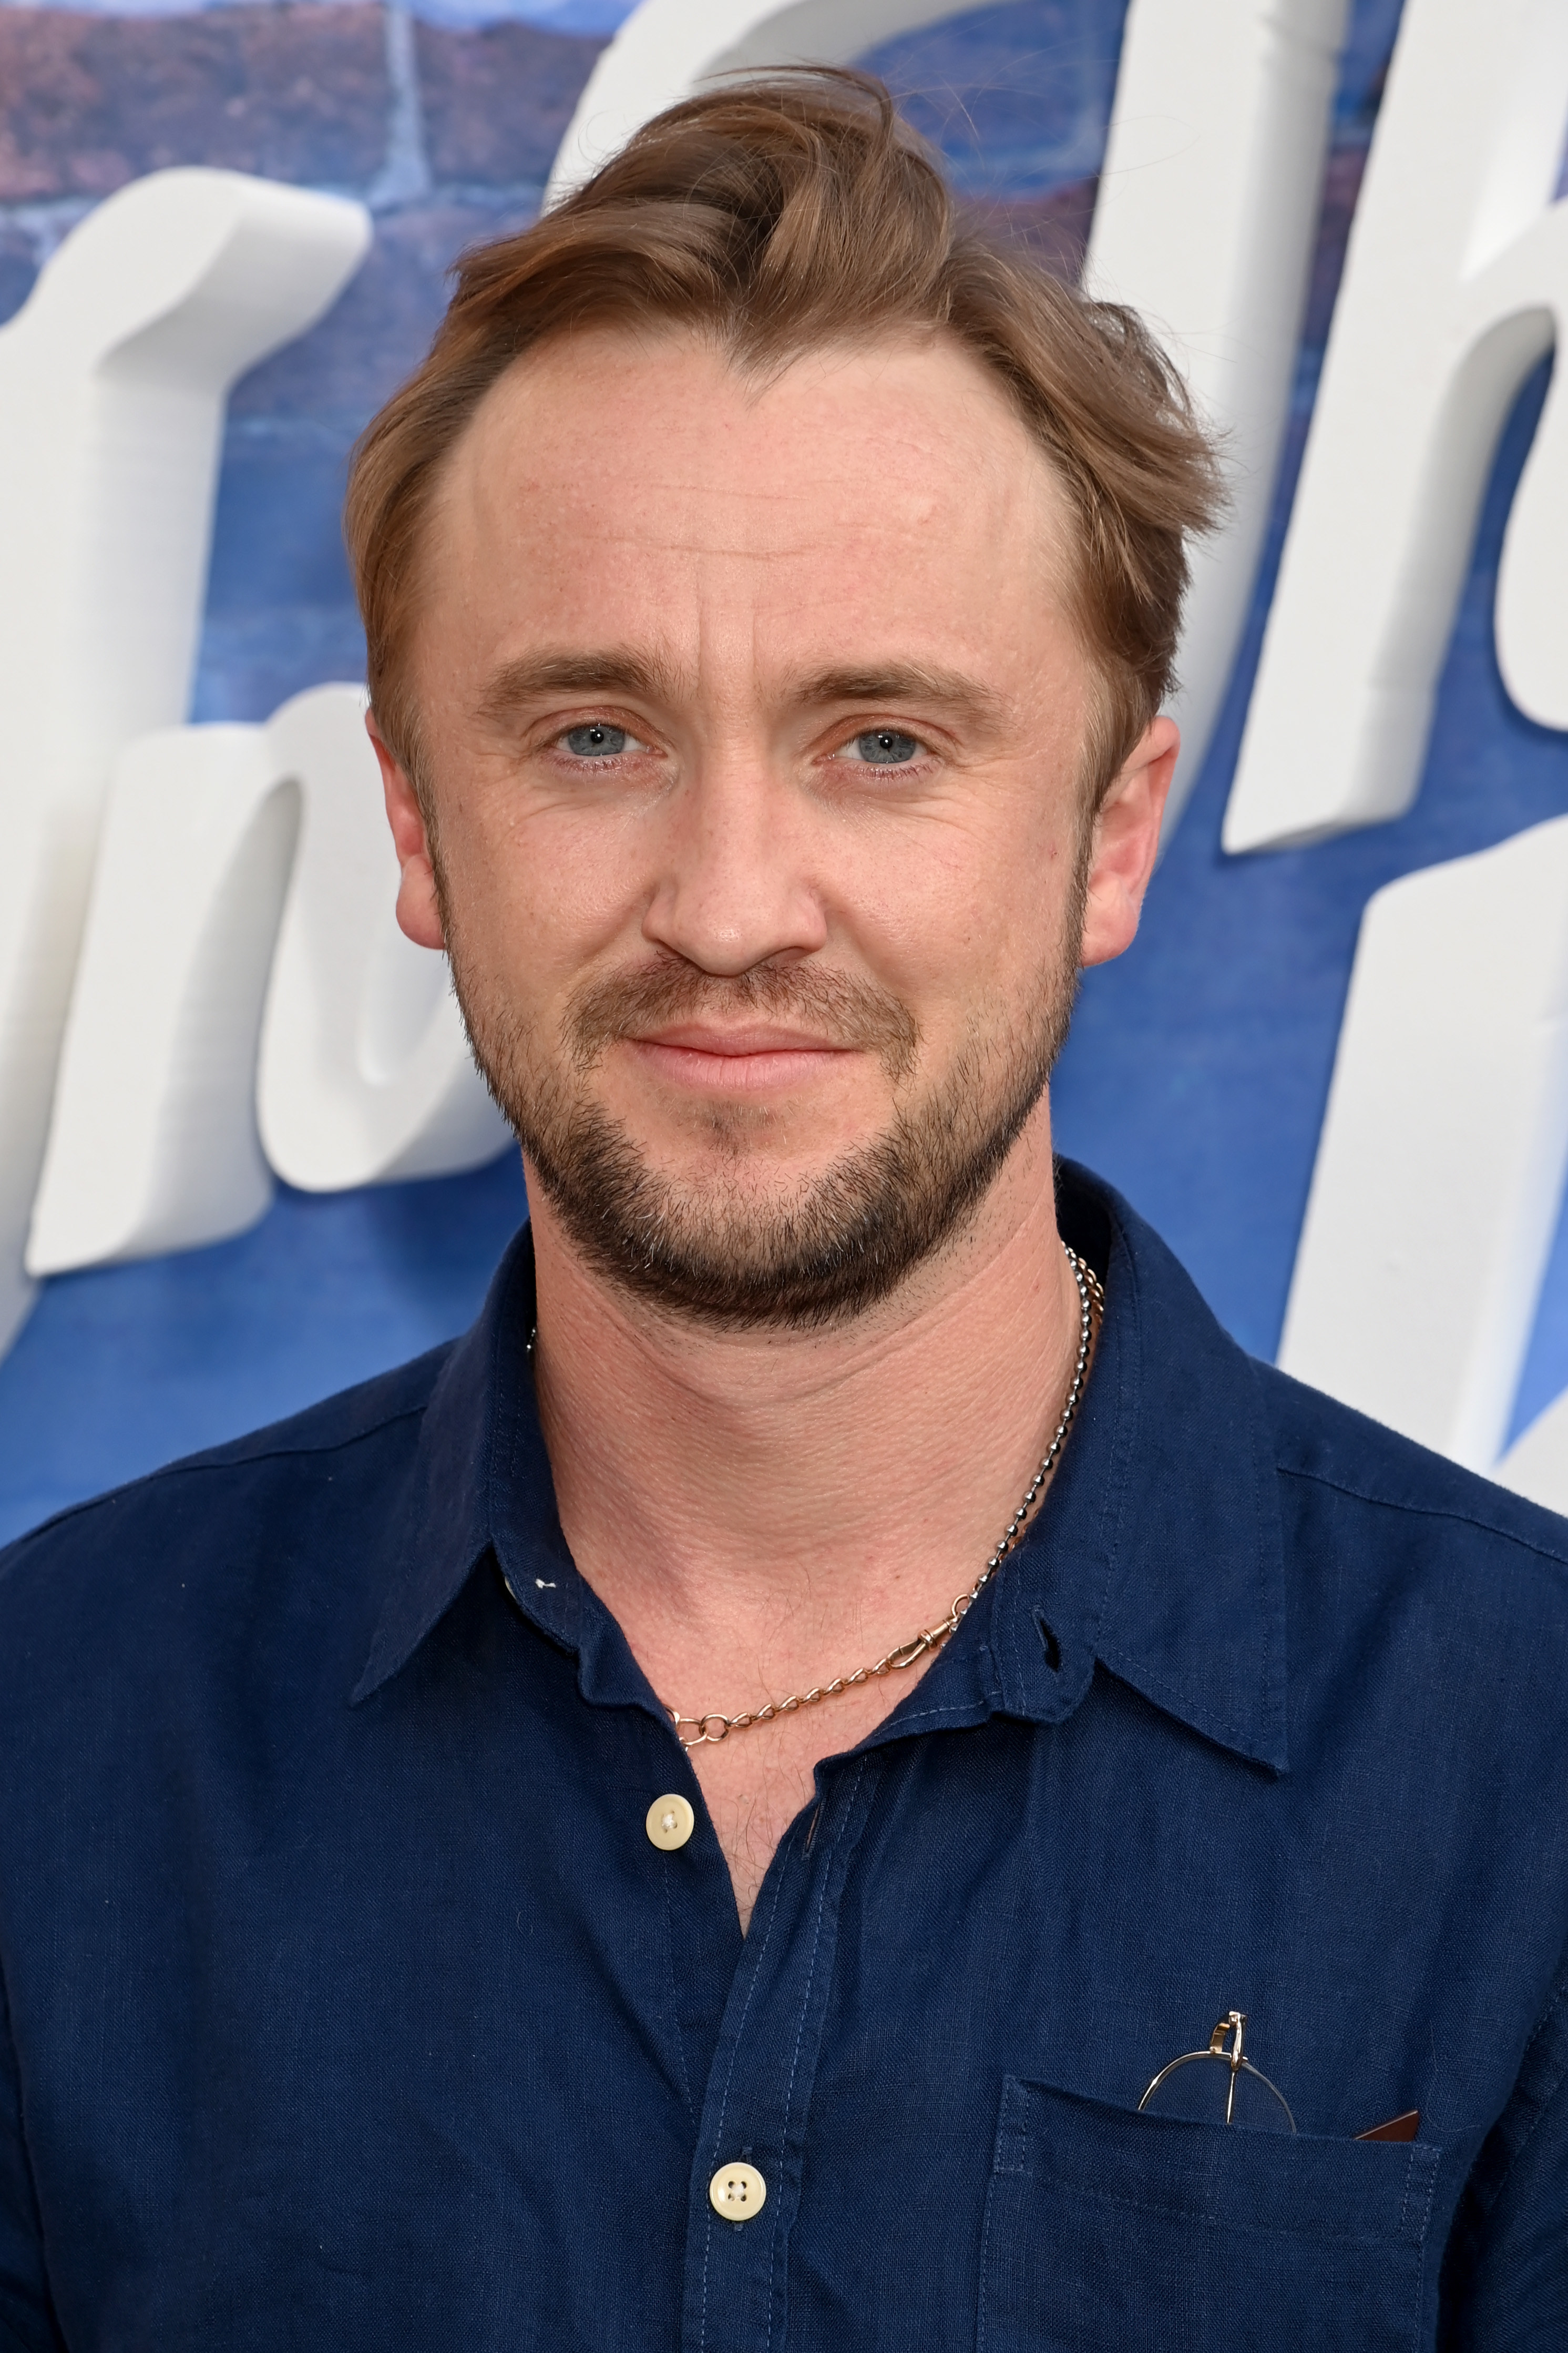 Tom Felton at an event with a pair of glasses in his front shirt pocket